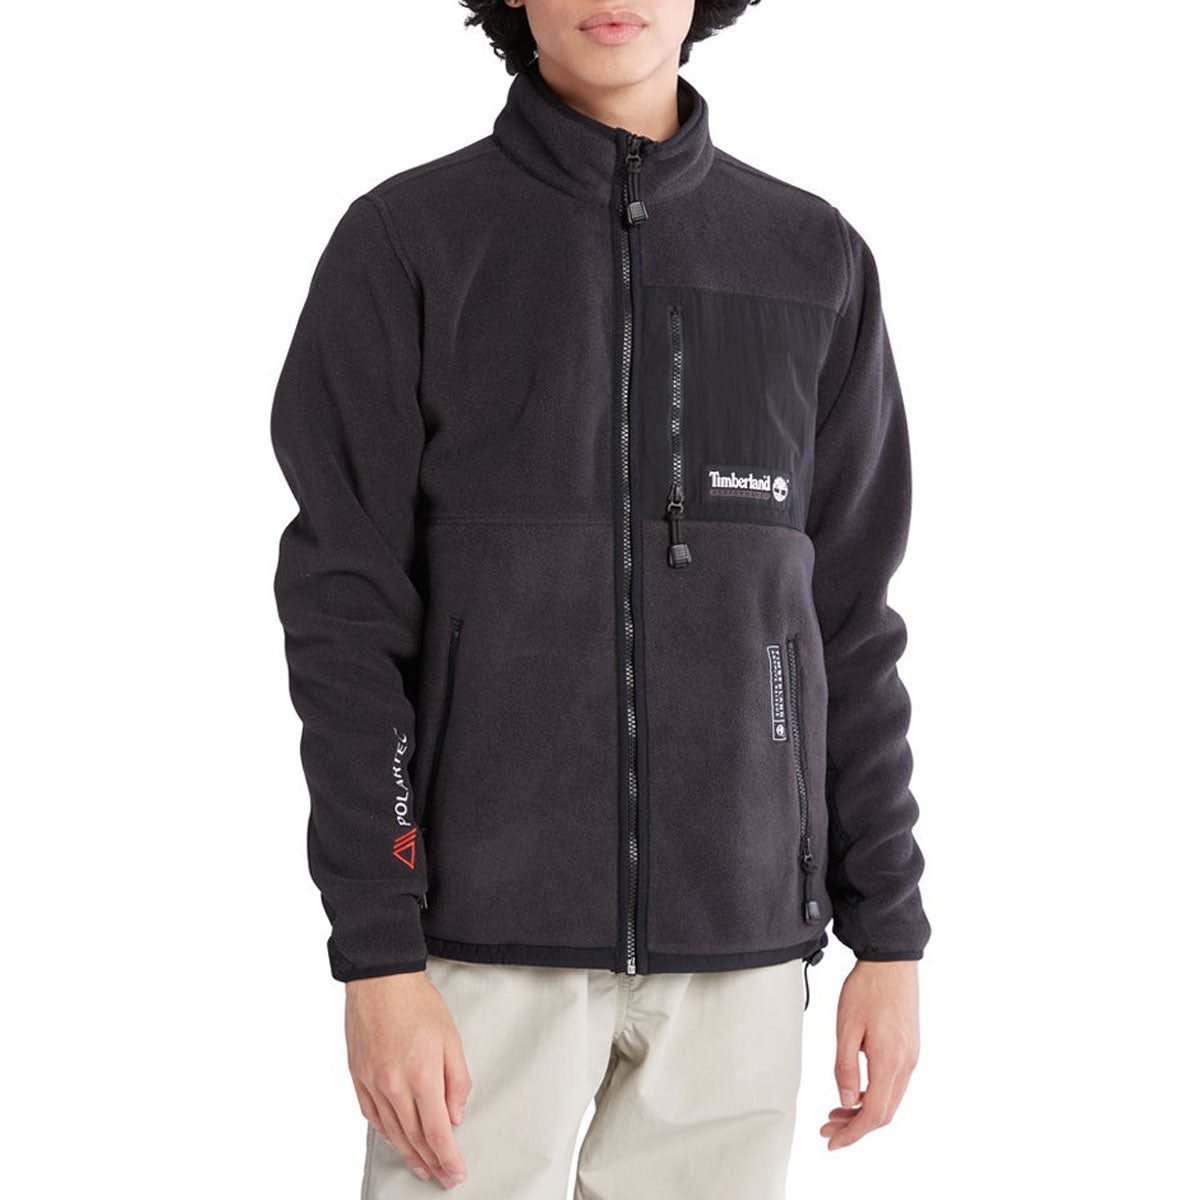 Timberland Outdoor Archive Re-issue Jacket - Black image 1